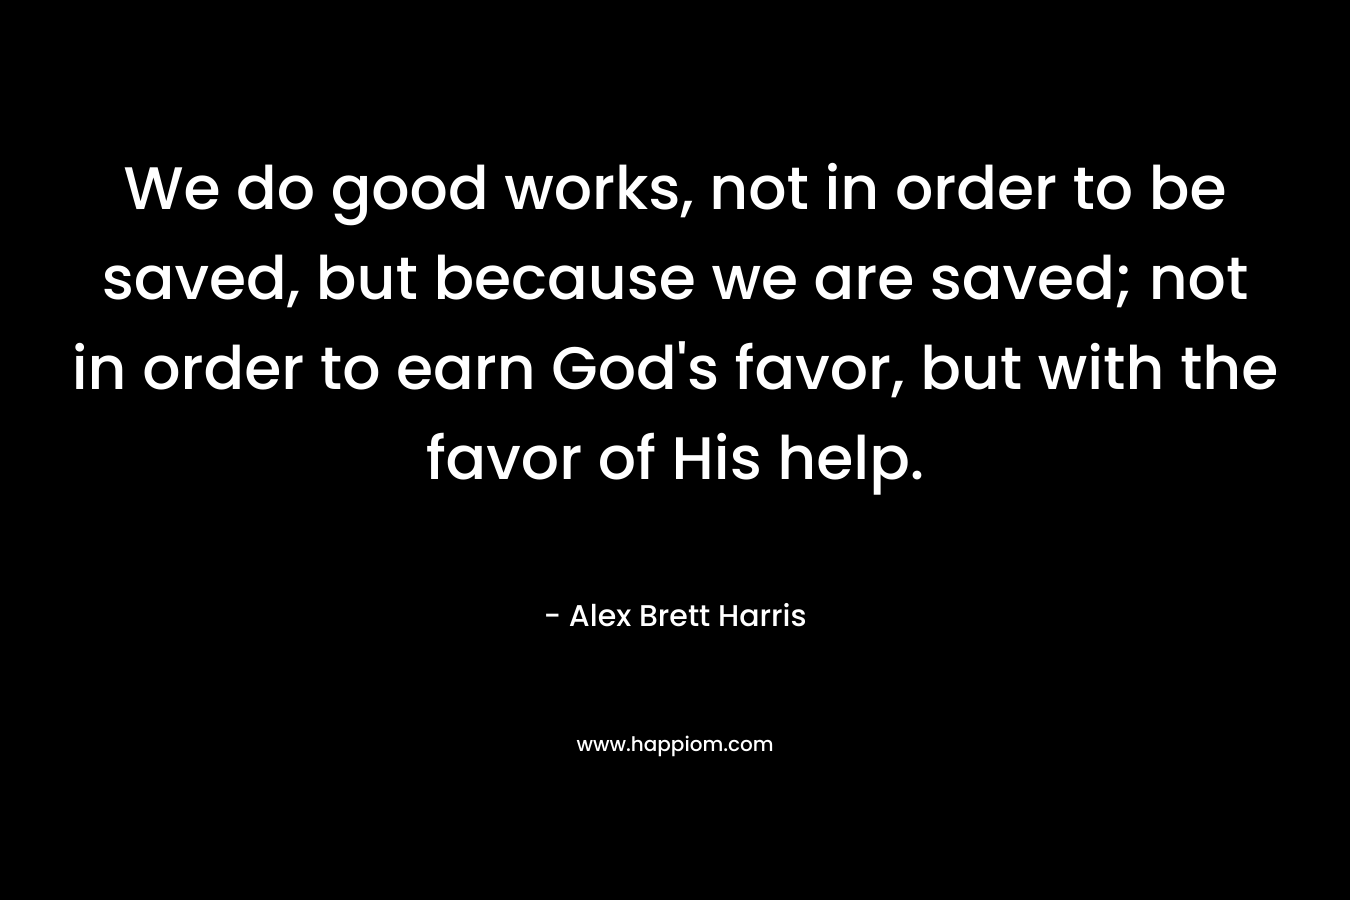 We do good works, not in order to be saved, but because we are saved; not in order to earn God's favor, but with the favor of His help.